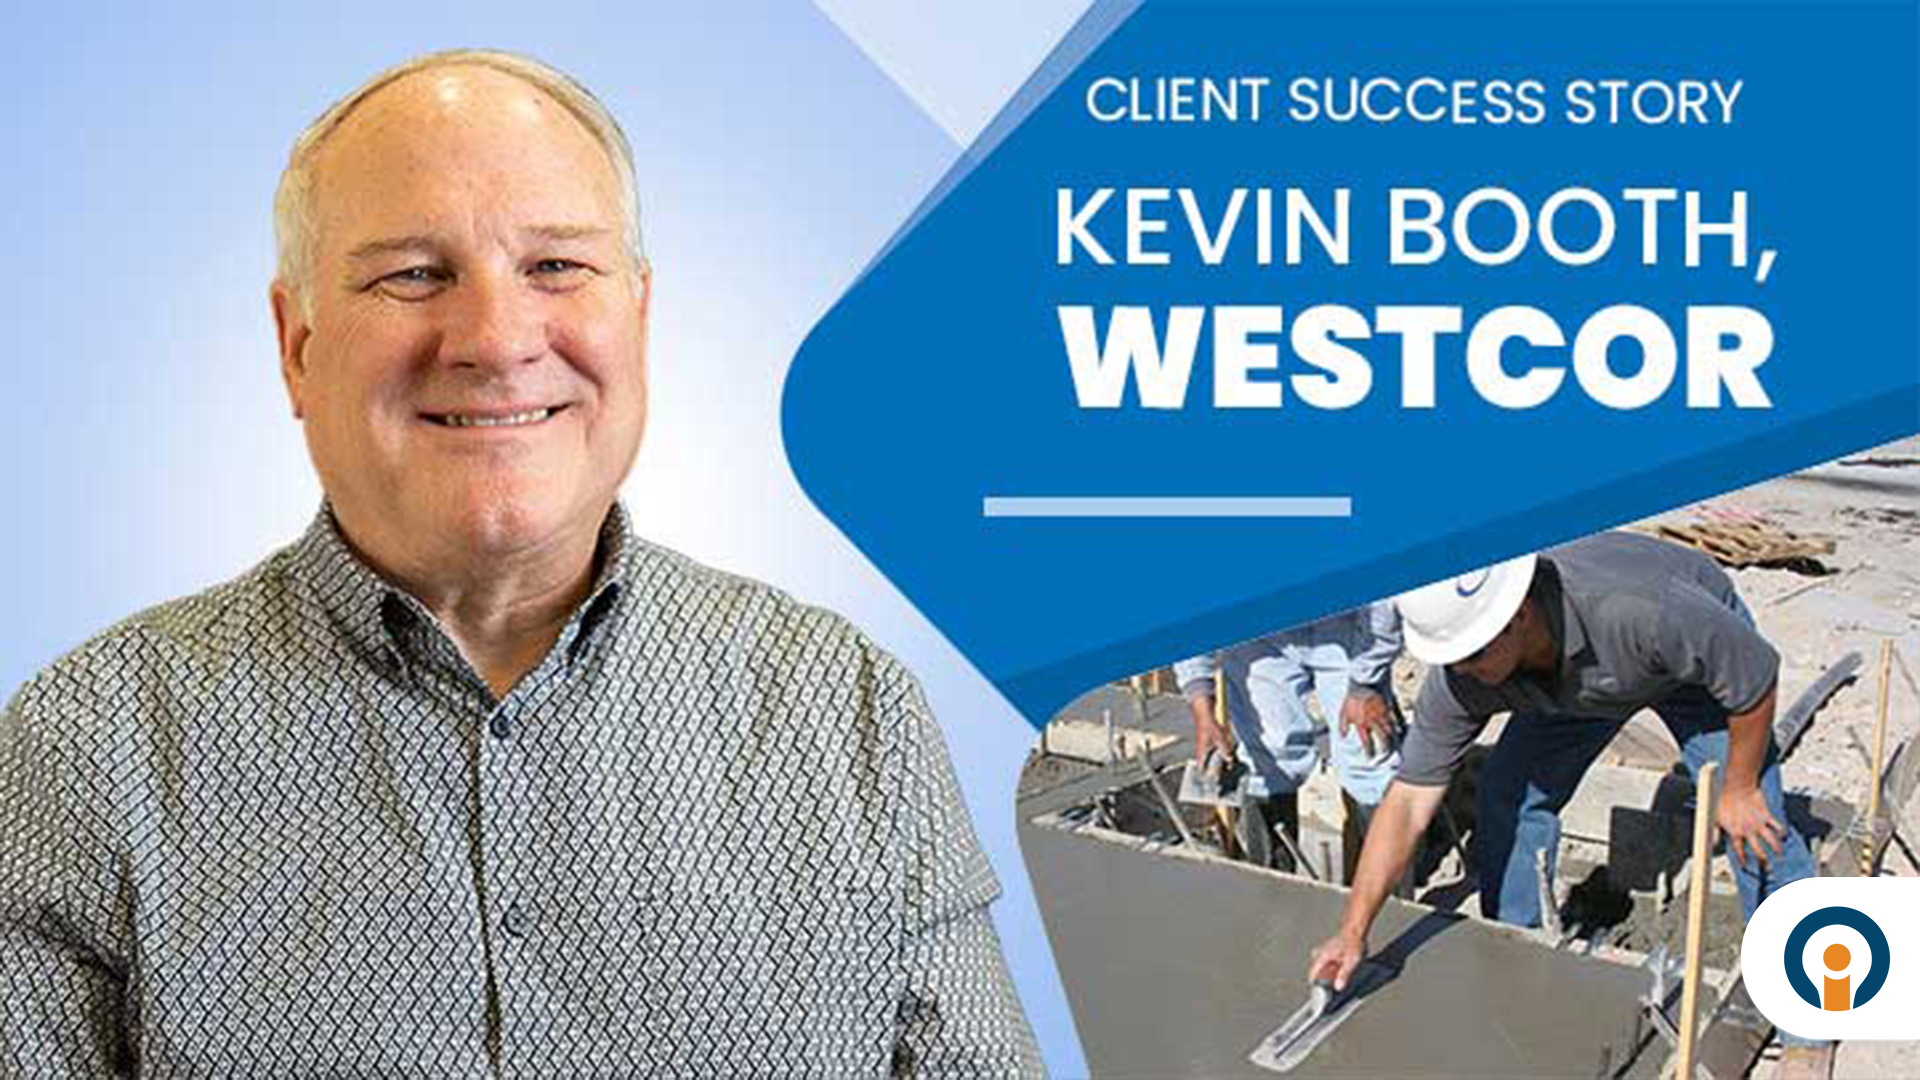 Client Success Story - Kevin Booth, Westcor